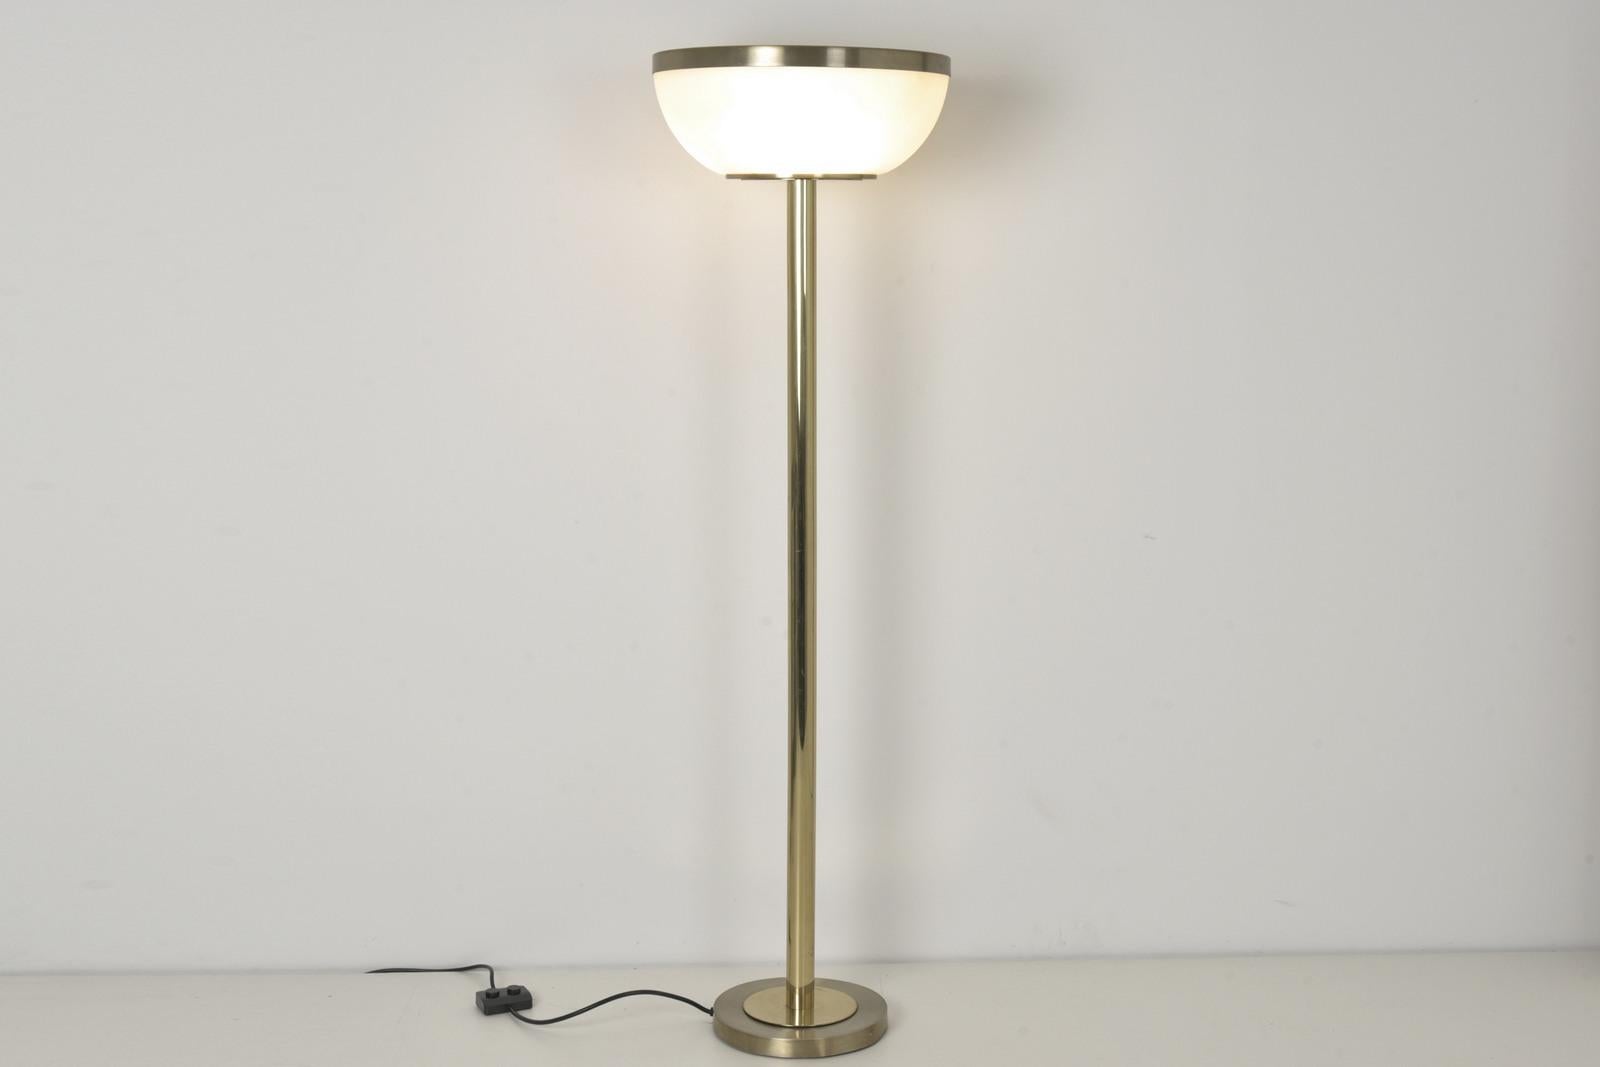 H 170 cm W 50 cm D 50 cm

Material: Base cast iron, aluminium gold anodized and lacquered, brass protective lacquered, reflector frosted glass frosted on one side outside, original foot switch 2-way switchable, connection cable white, 1 x 3 sockets